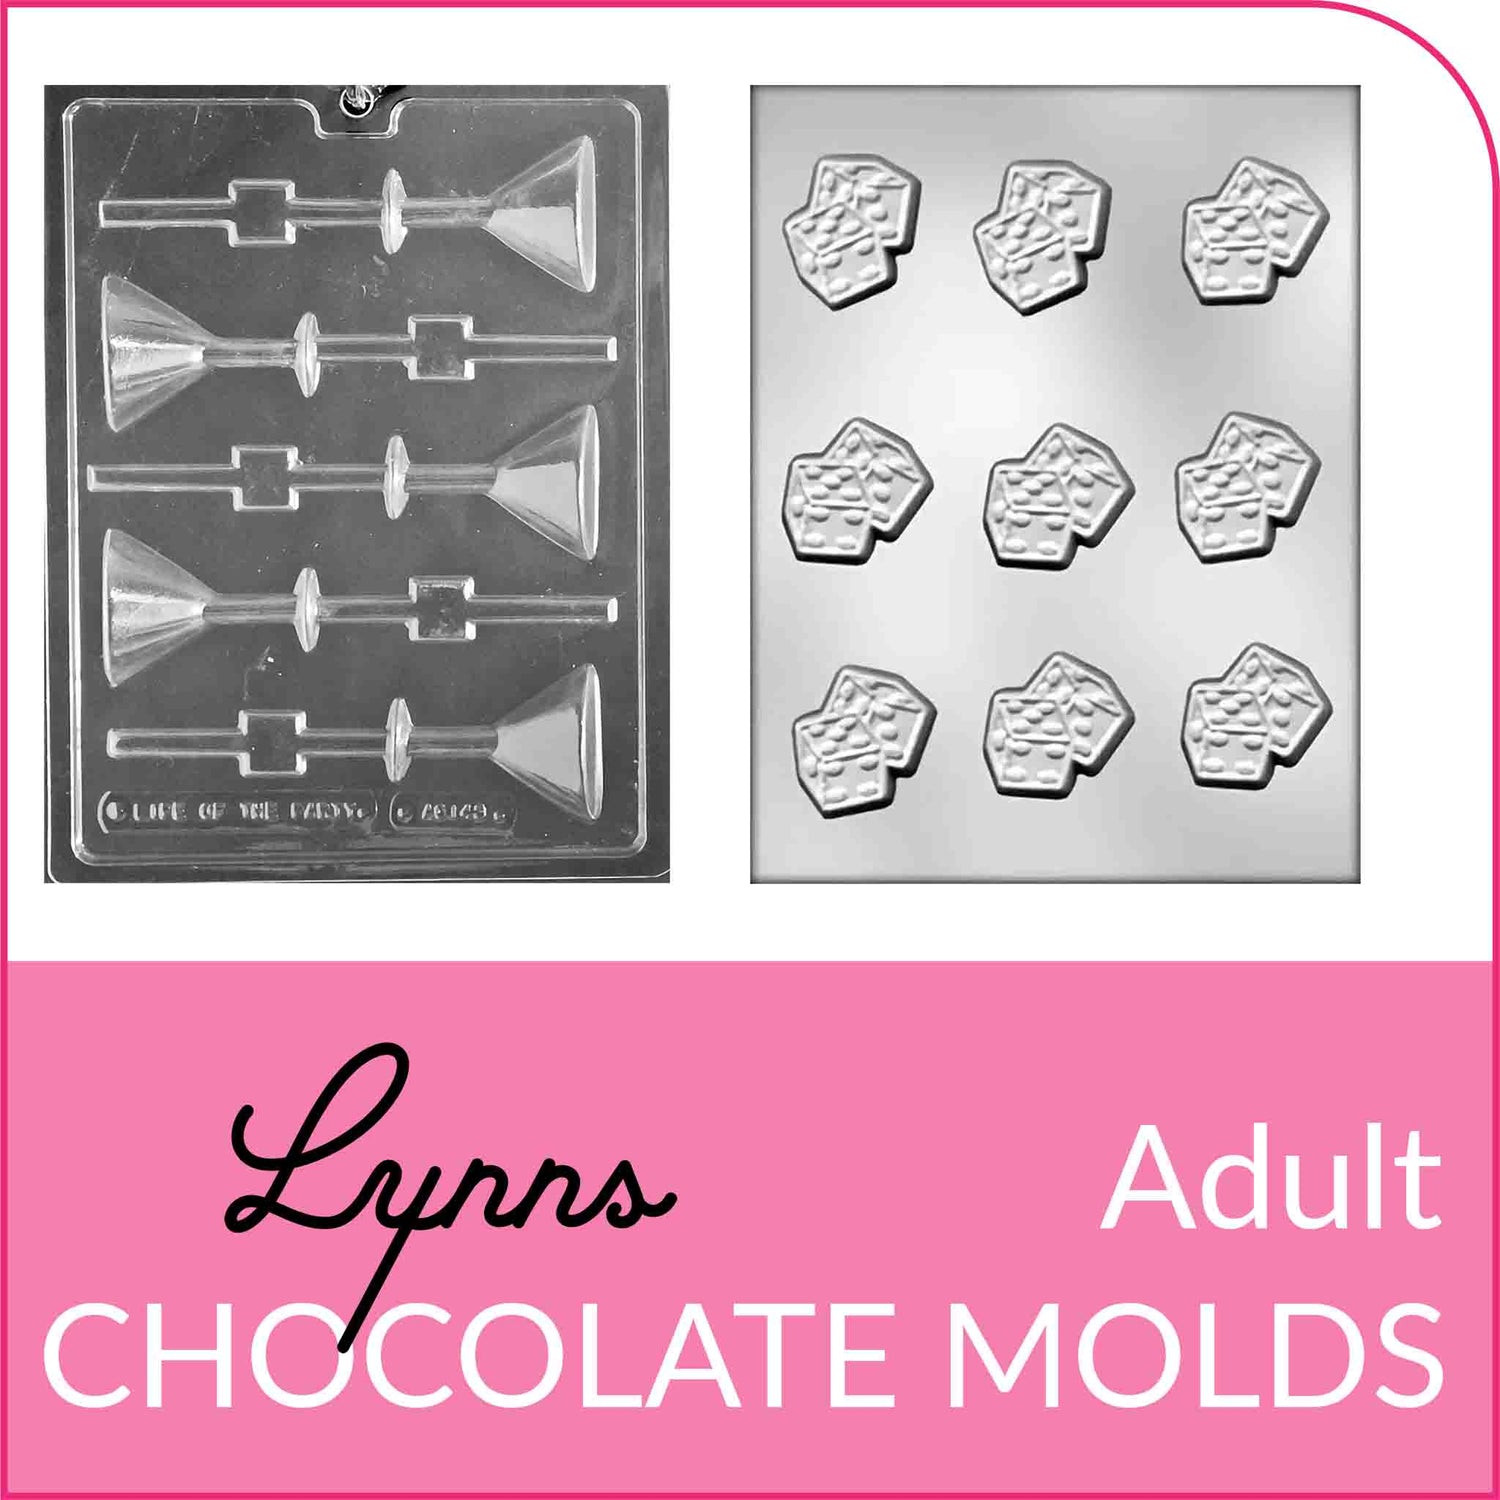 Shop Adult-Themed Chocolate Molds at Lynn's